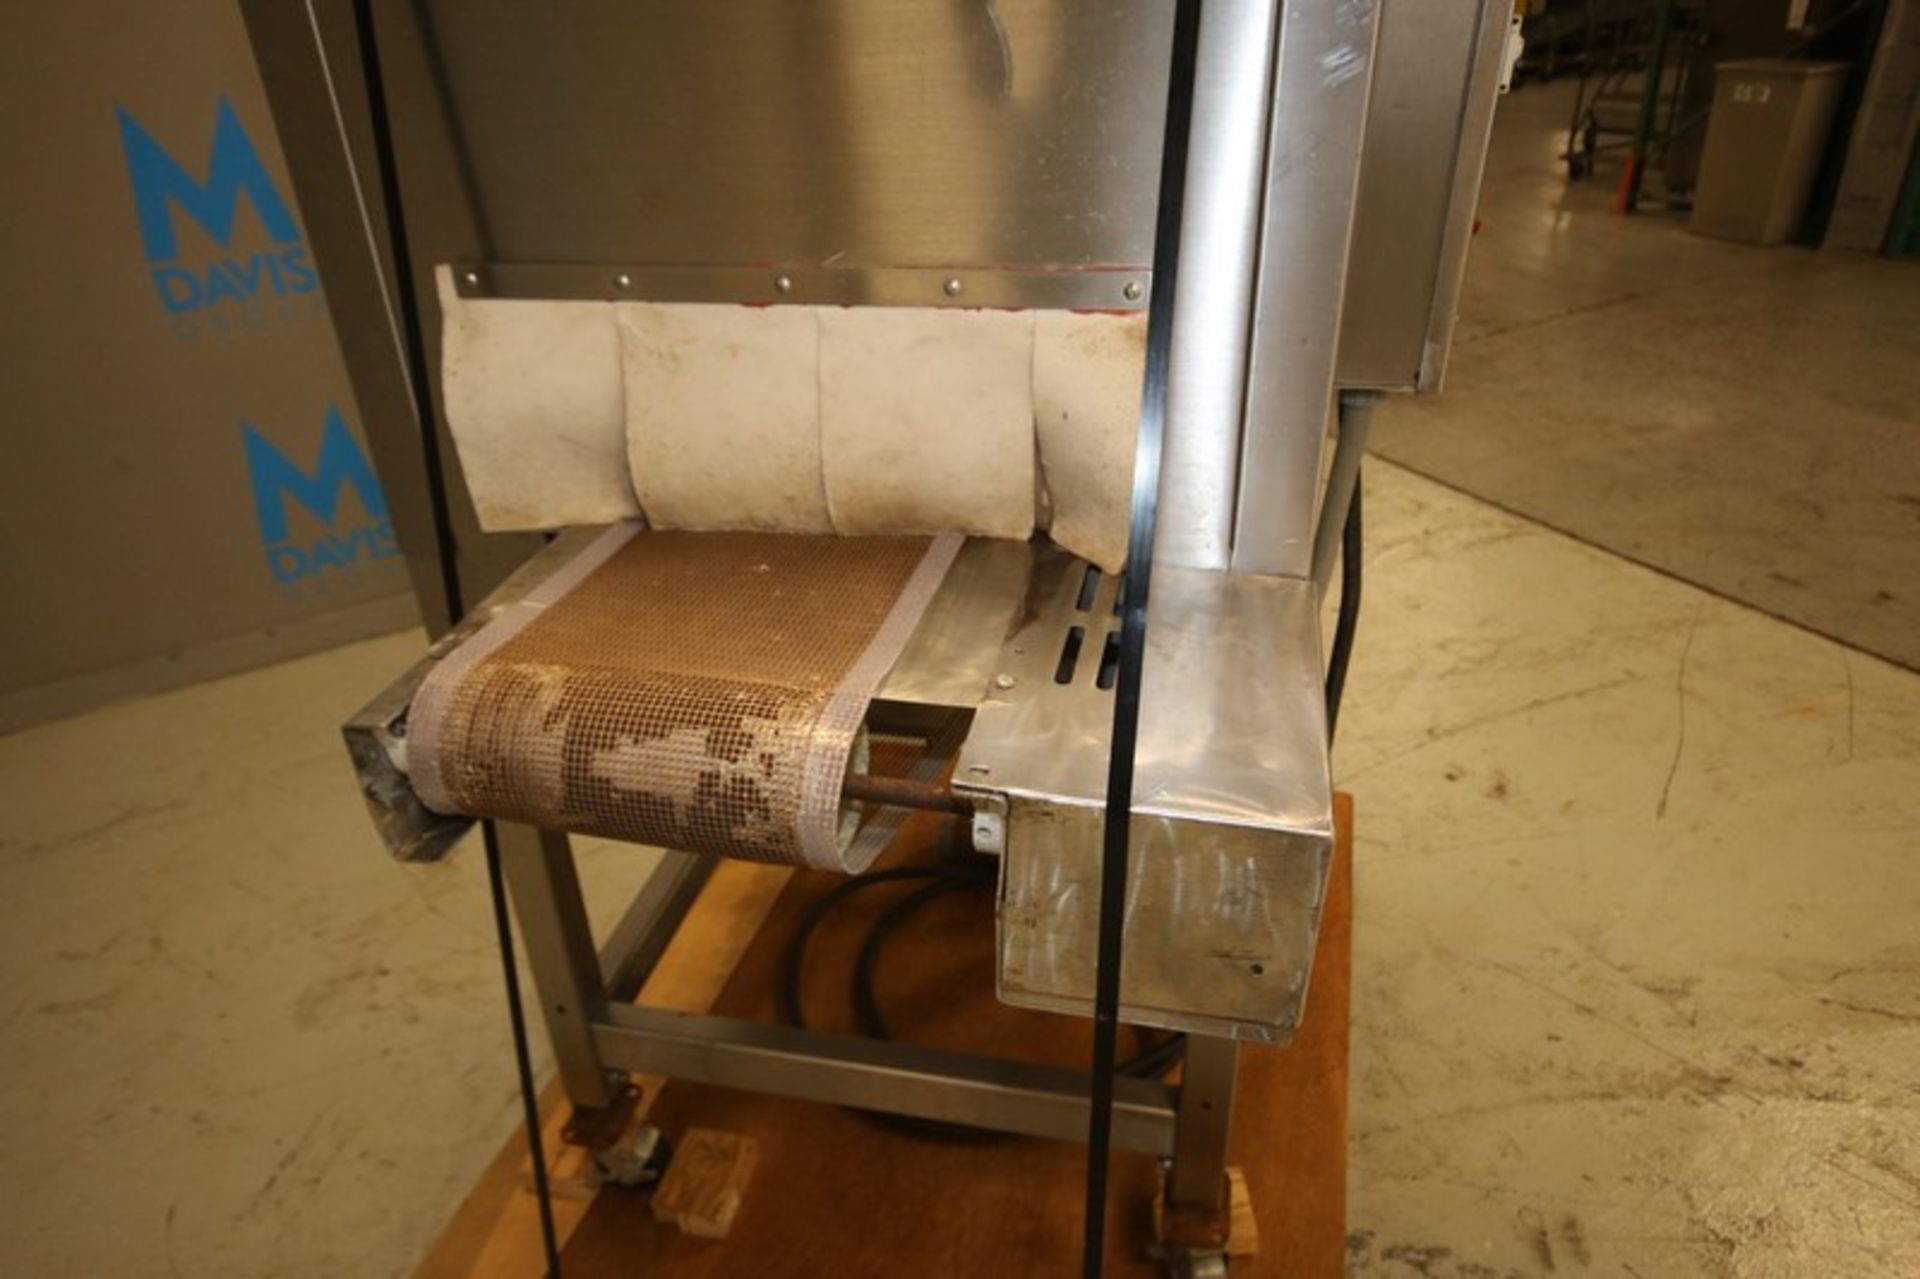 Shanklin 11" W x 6.5" H S/S Shrink Wrap Heat Tunnel, 115 V, Mounted on Casters (INV#88602)(Located @ - Image 6 of 8